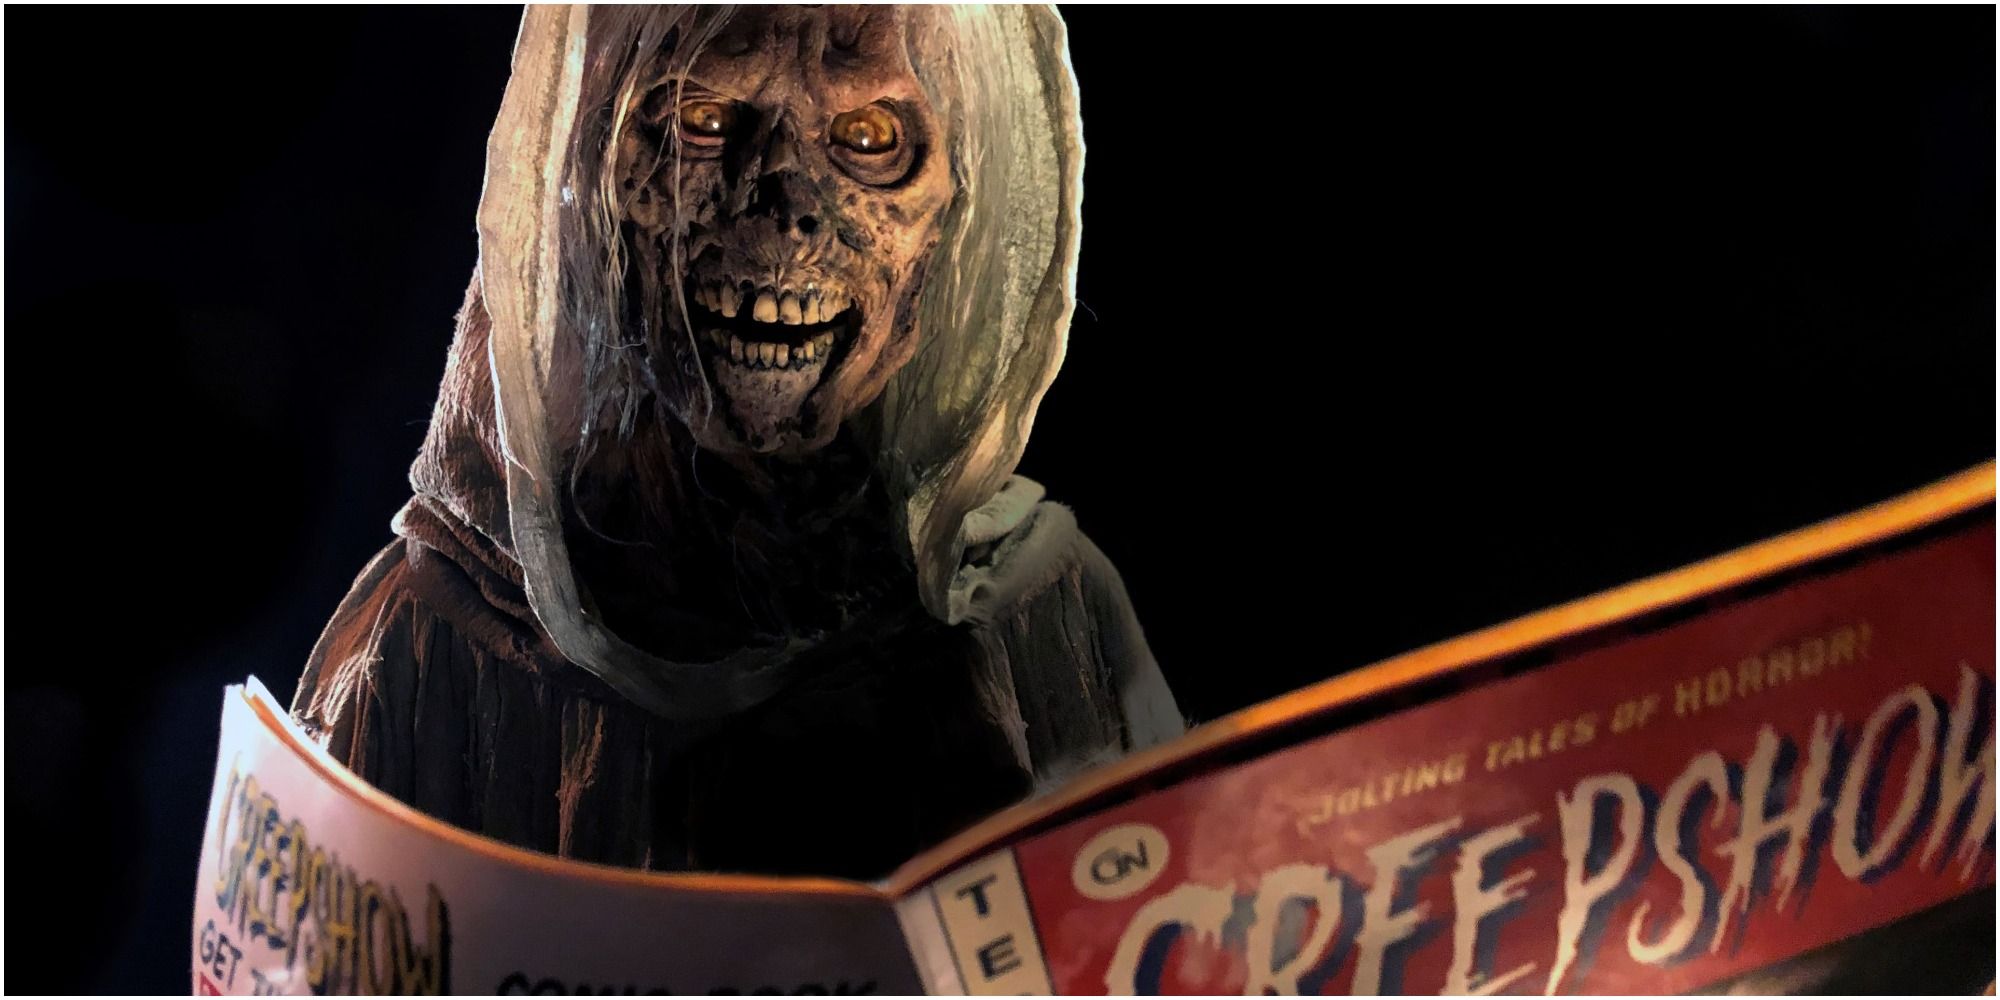 The Creep of the 2019 Creepshow anthology